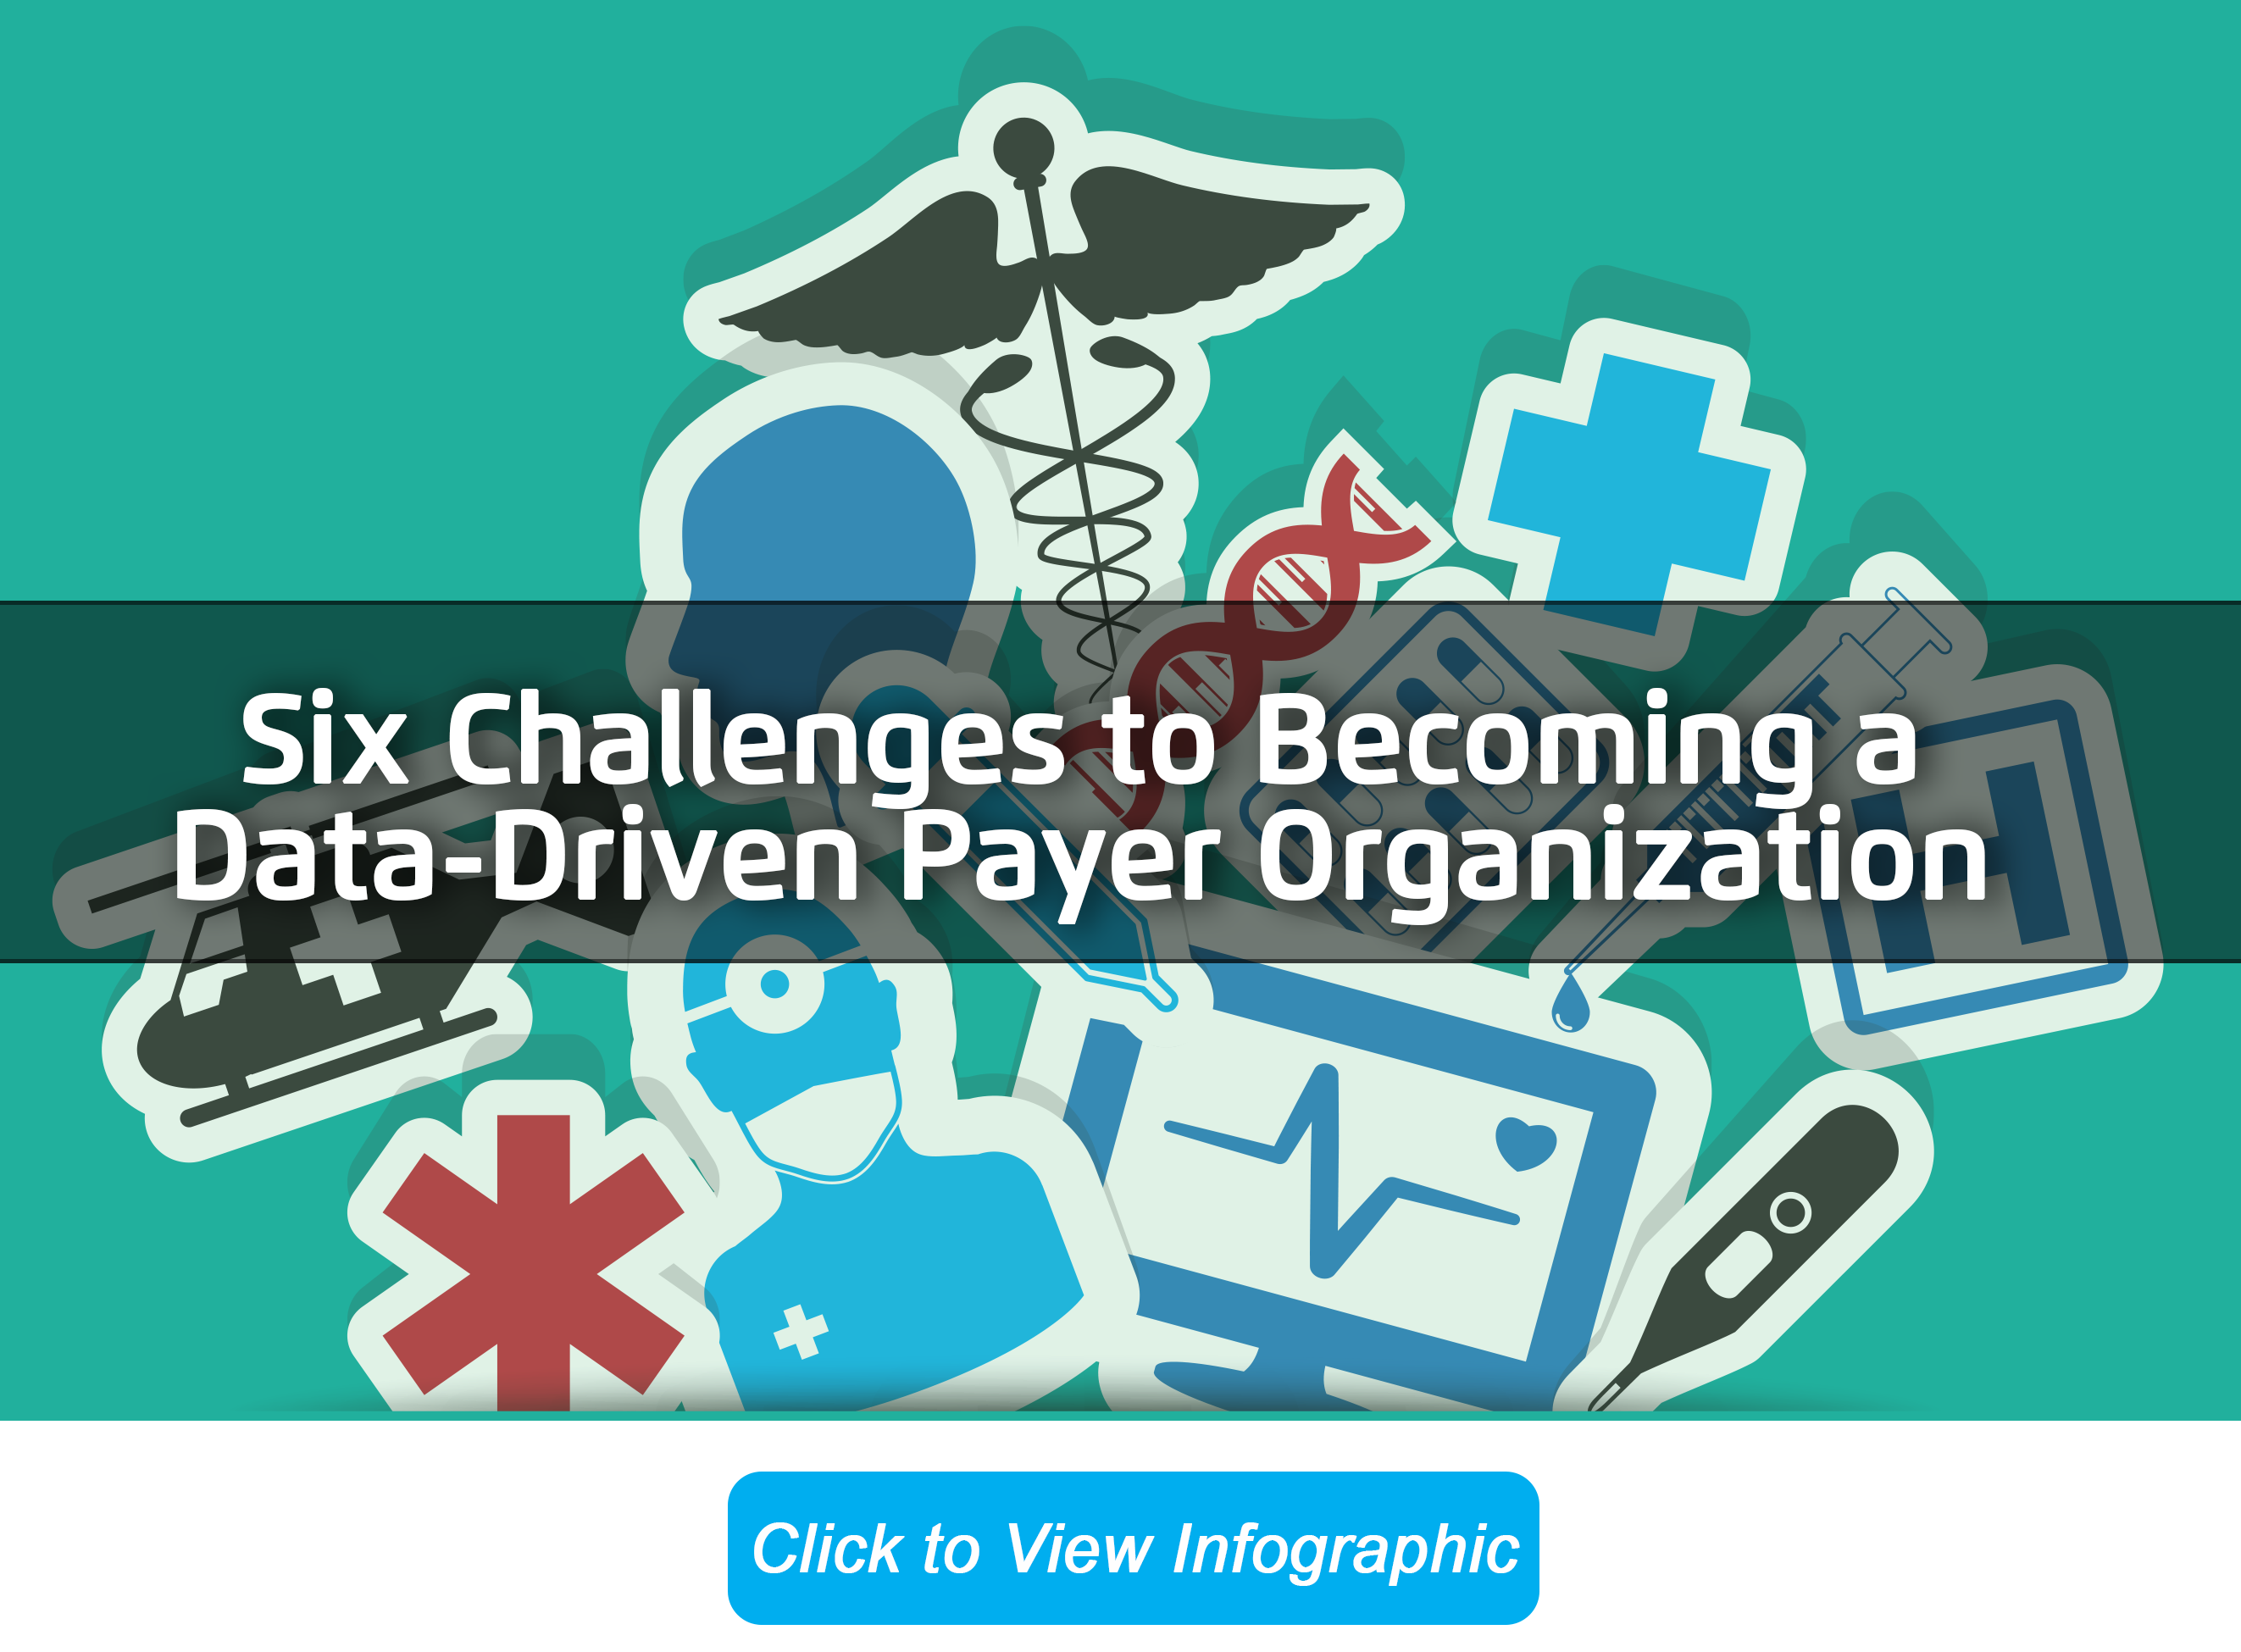 Six Challenges to Becoming a Data-Driven Payer Organization infographic cover